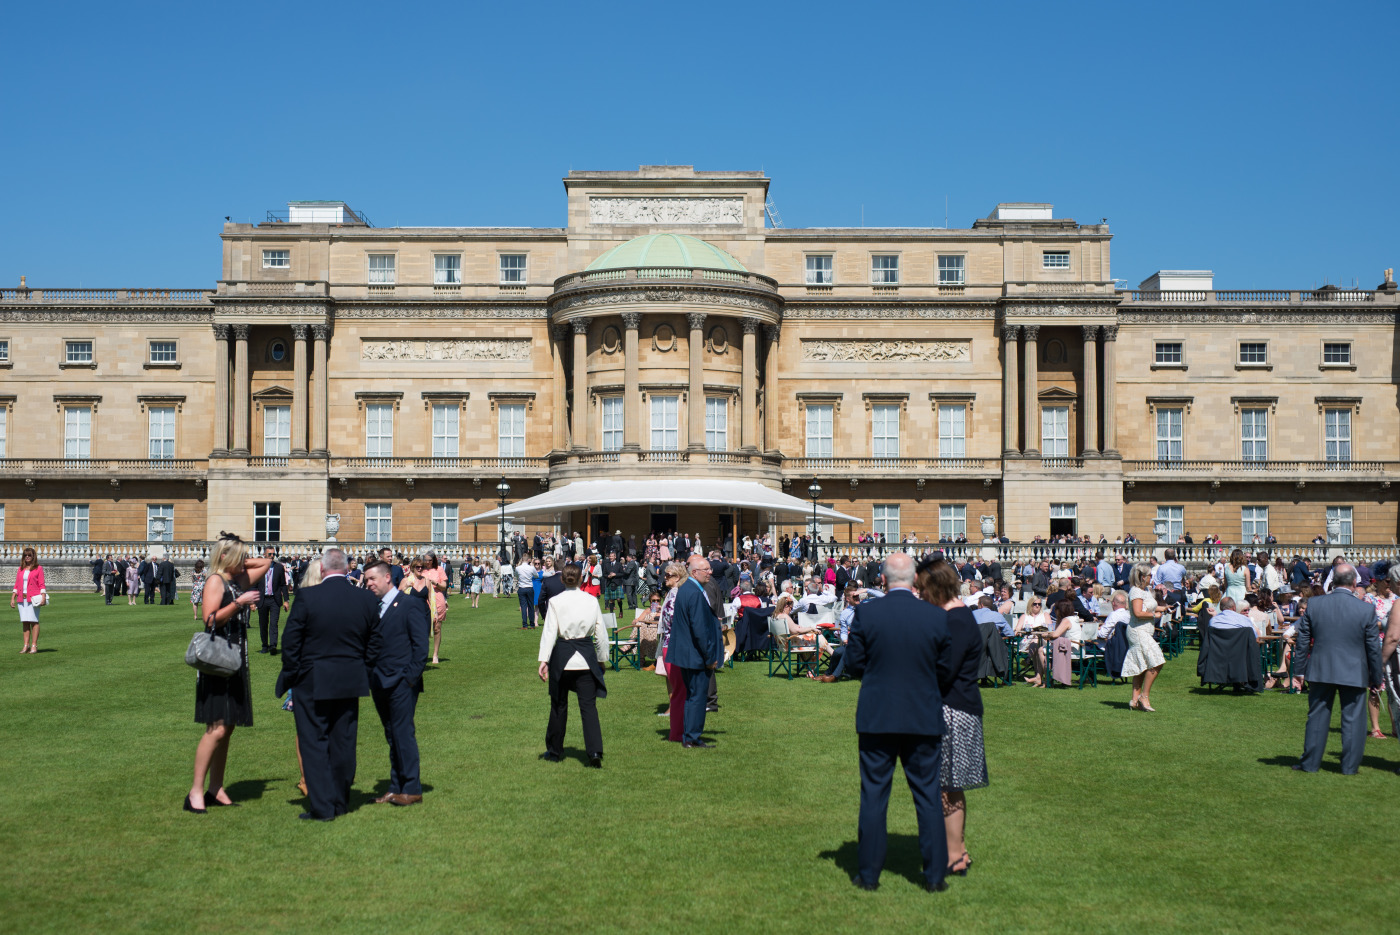 Thousands gather at Buckingham Palace to celebrate at RoSPA Garden Party